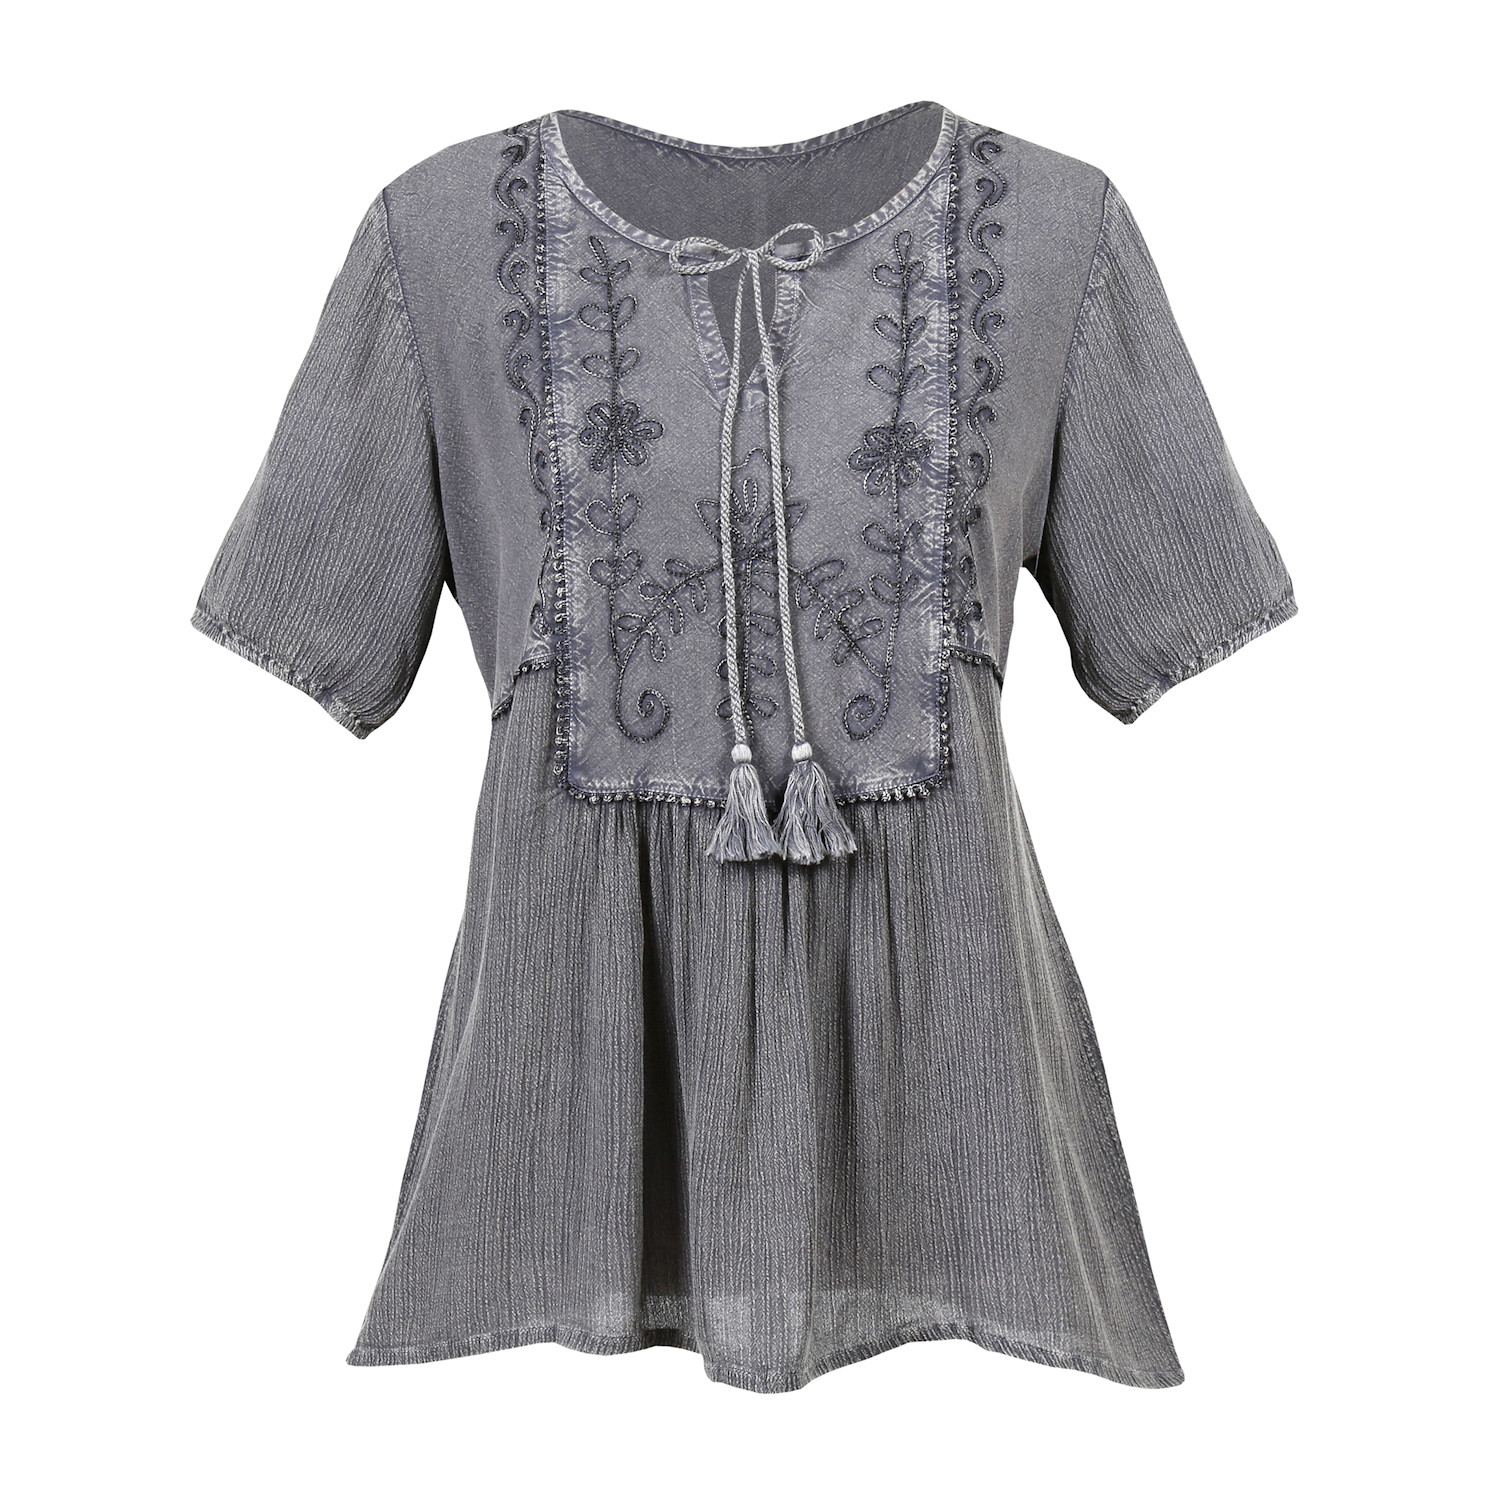 Women's Peasant Blouse Tunic Top | Signals